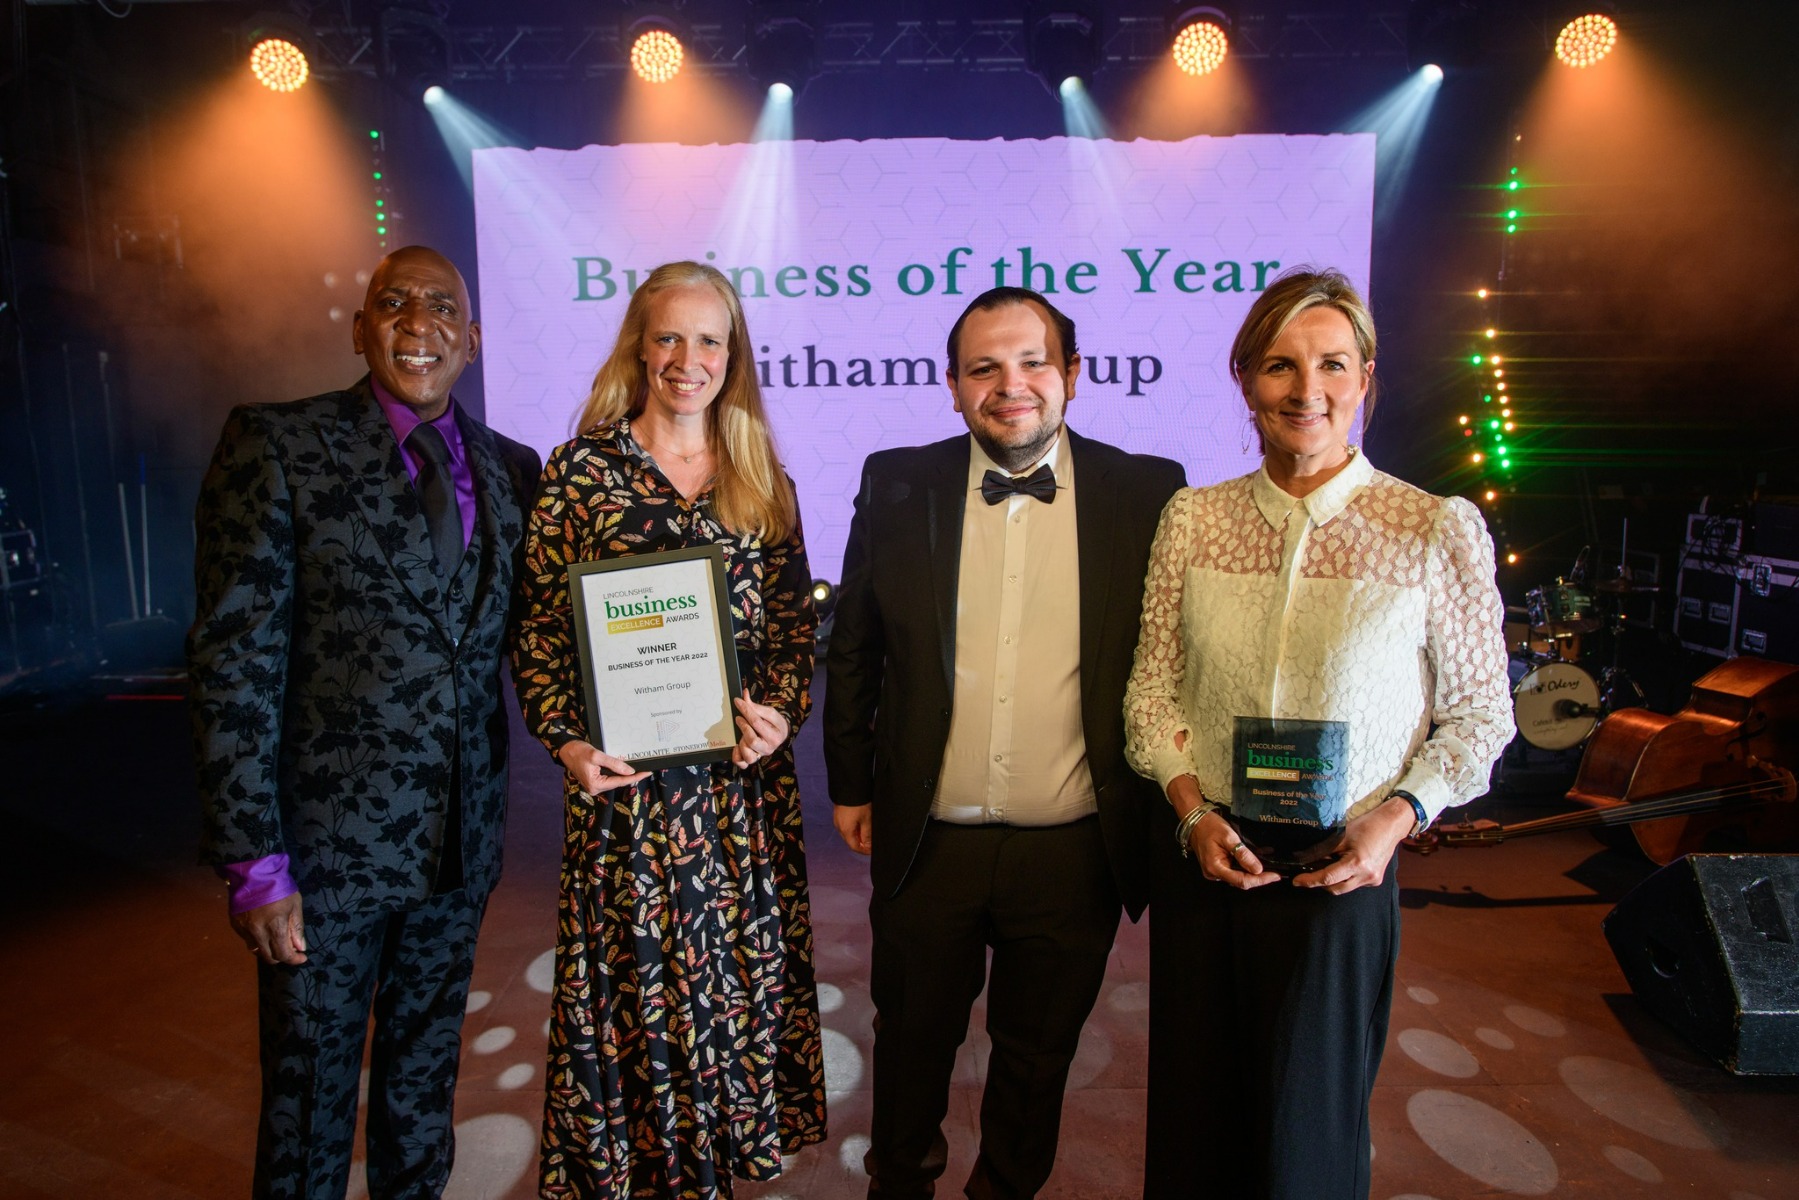 Witham Wins 'Business of the Year'!